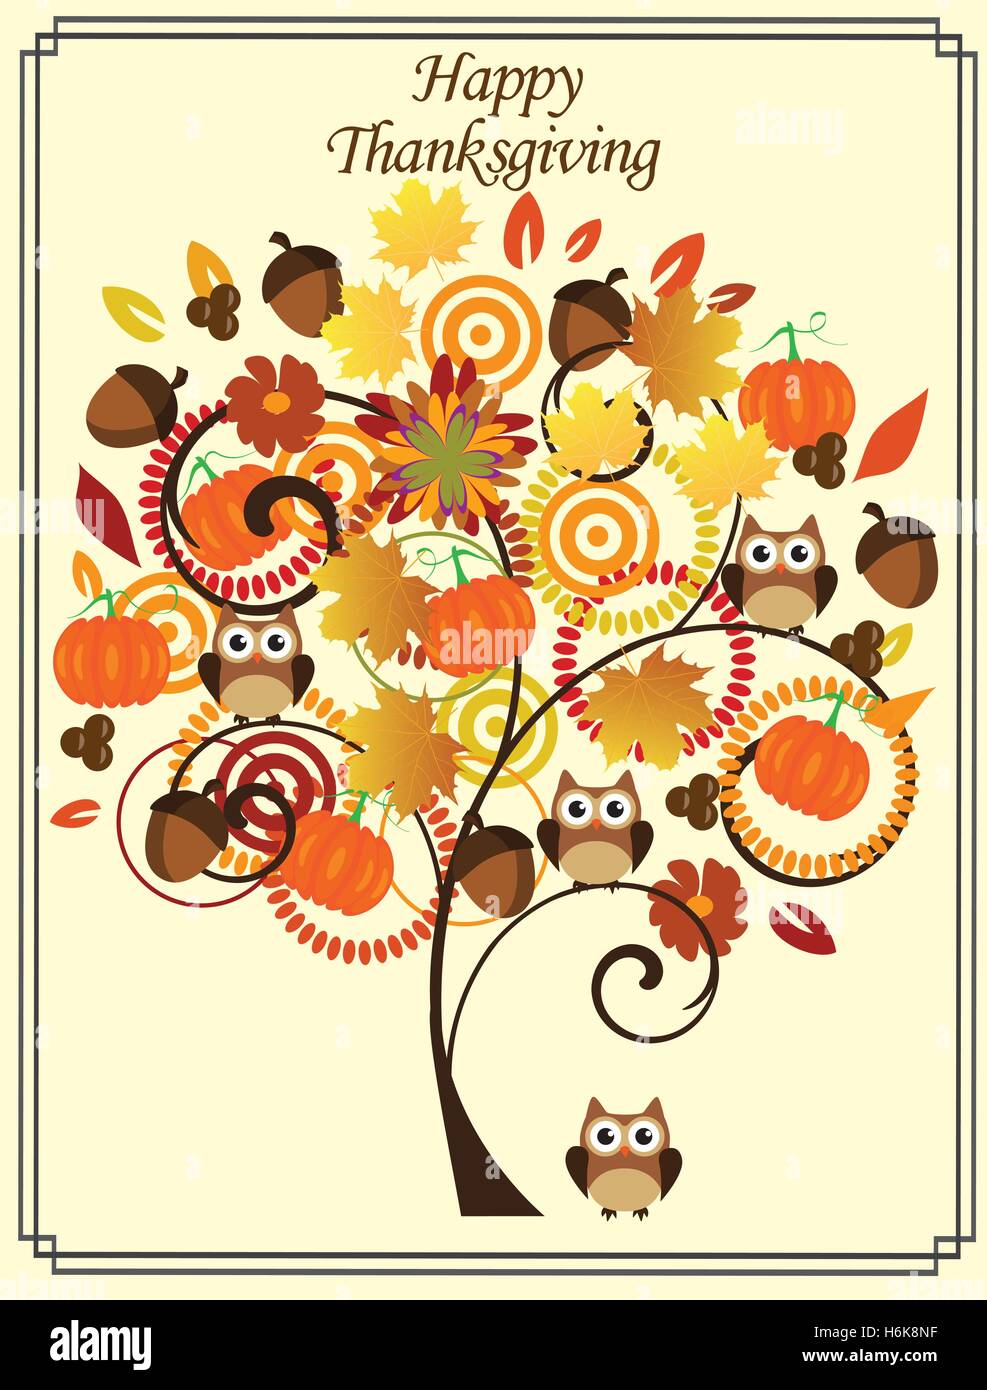 vector illustration of a thanksgiving day card with tree, owls, pumpkins Stock Vector